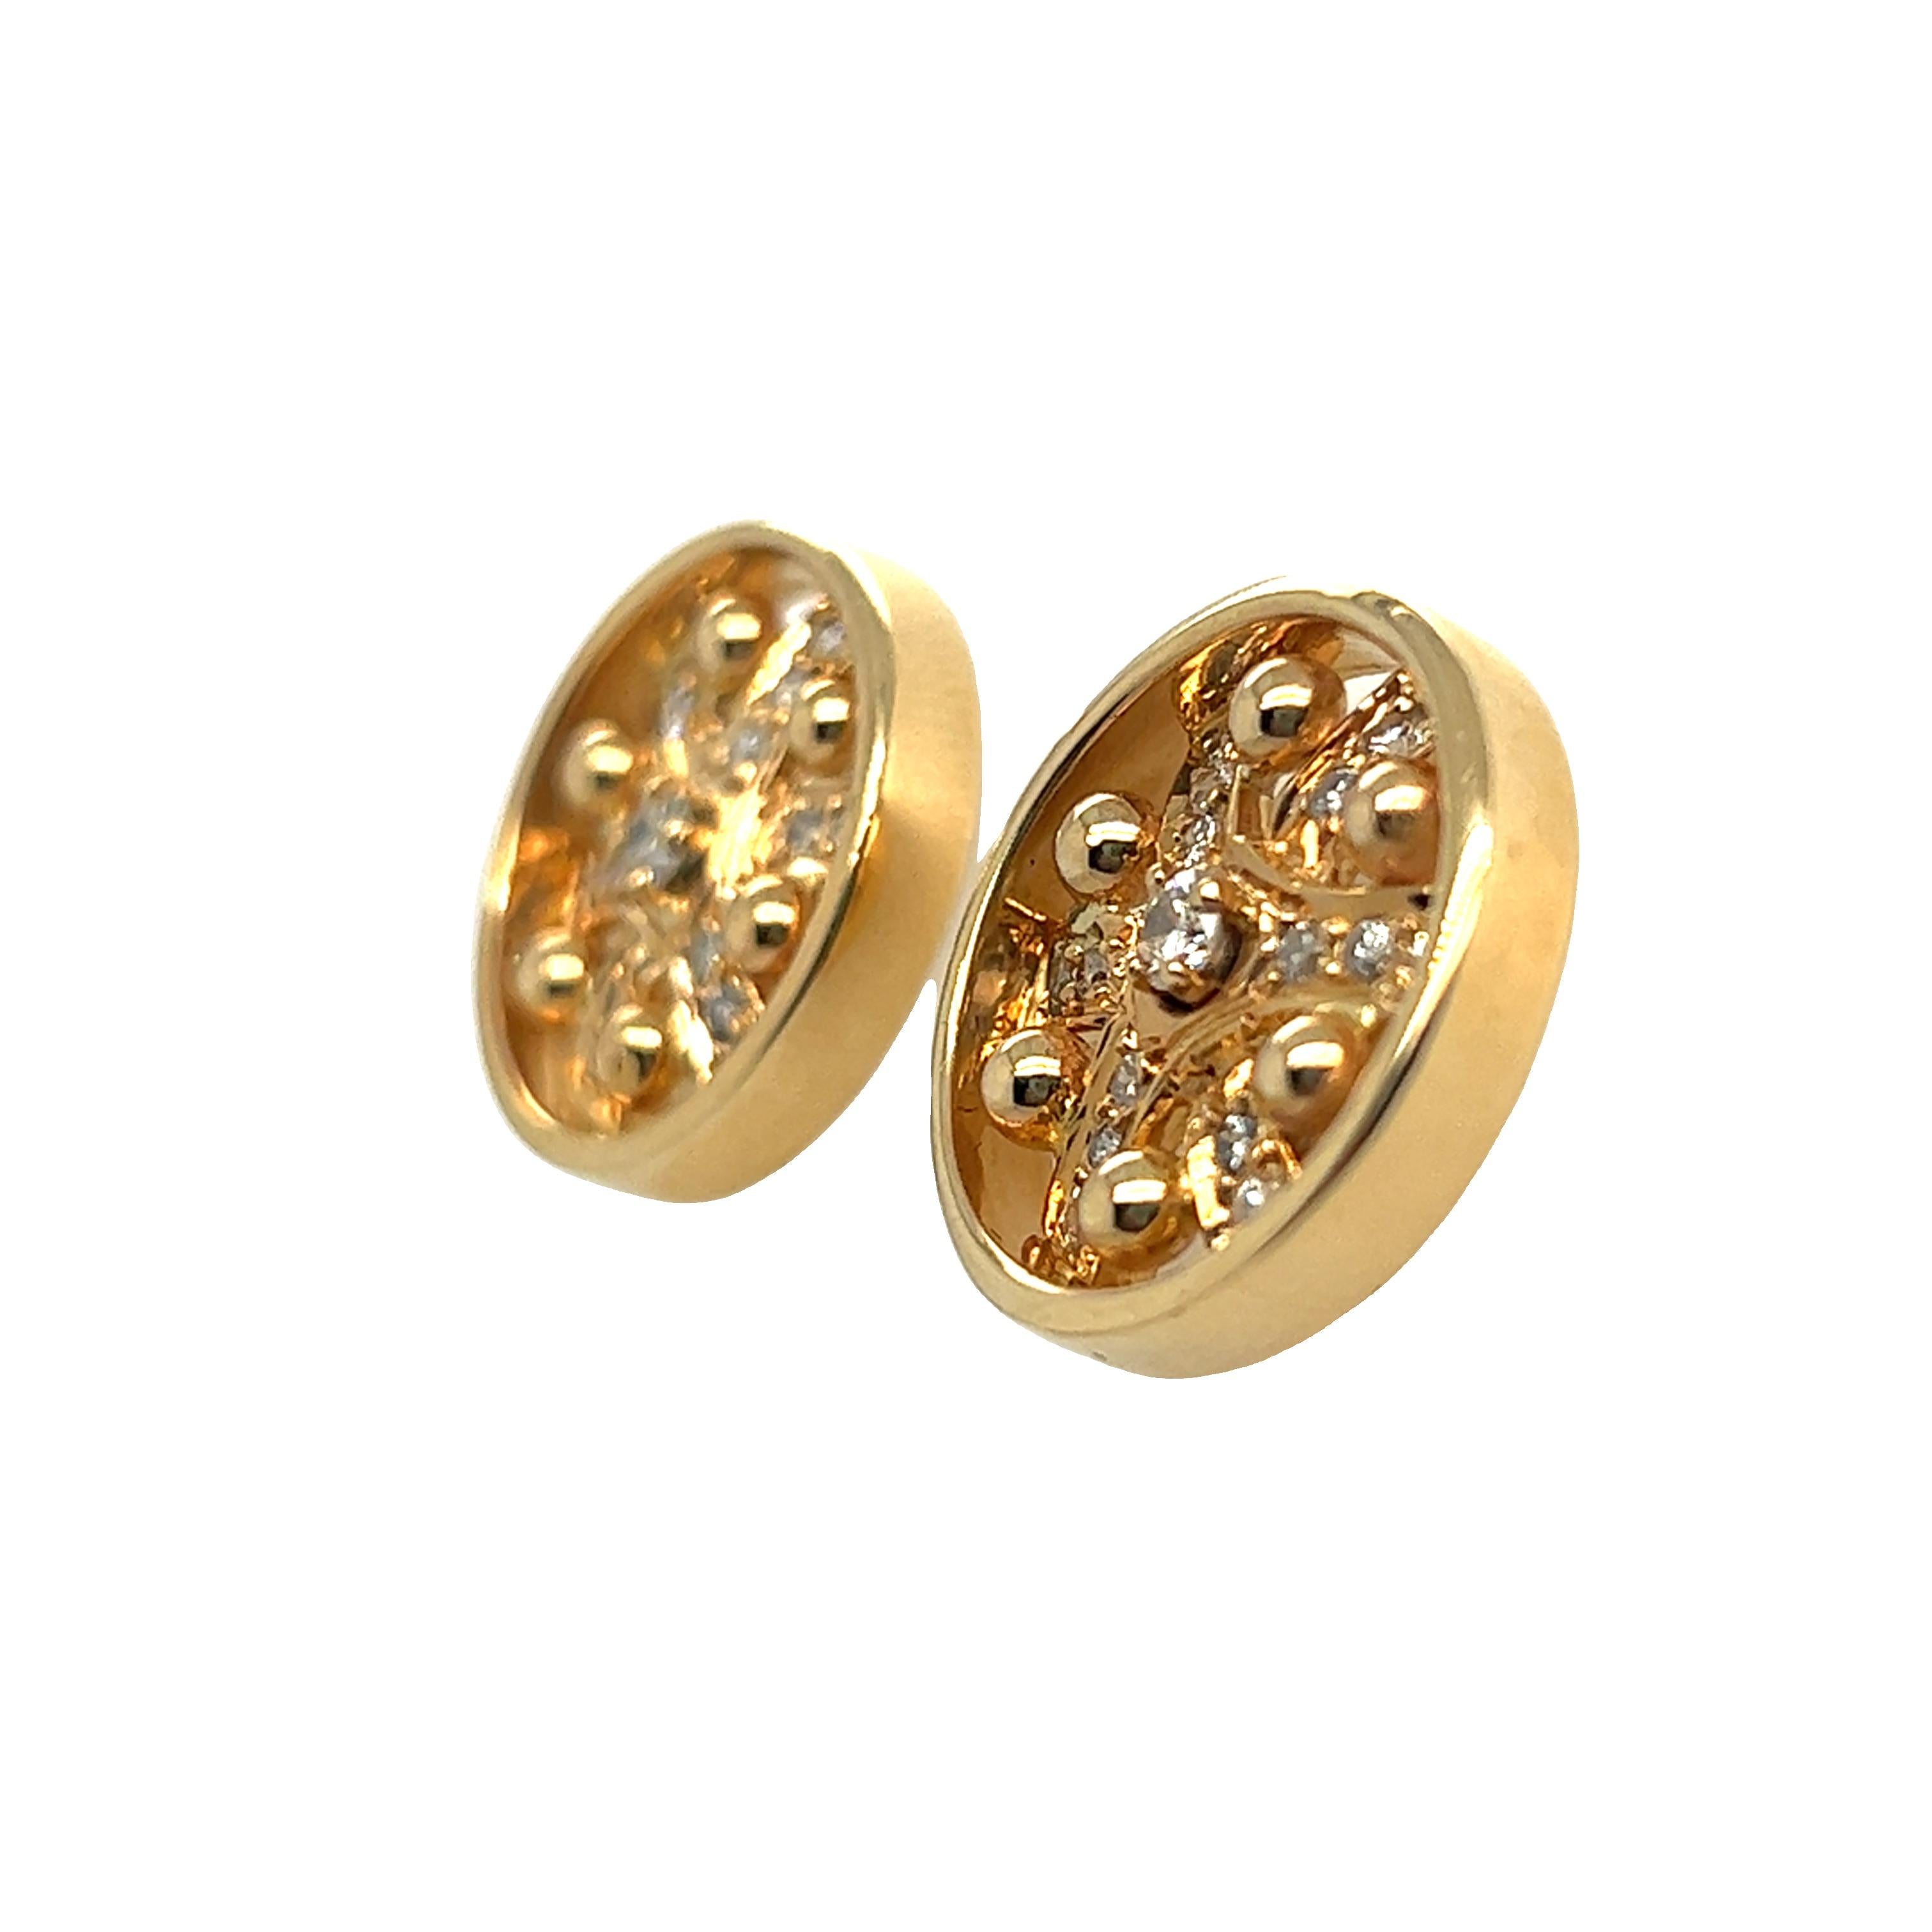 Bold and unique 14k yellow disc stud earrings. Inside the disc frame showcases gold beads and sixteen diamonds on each earrings. The total weight of these diamonds is about 1 carat with H-I color and SI2 clarity. The earrings are pierced with post